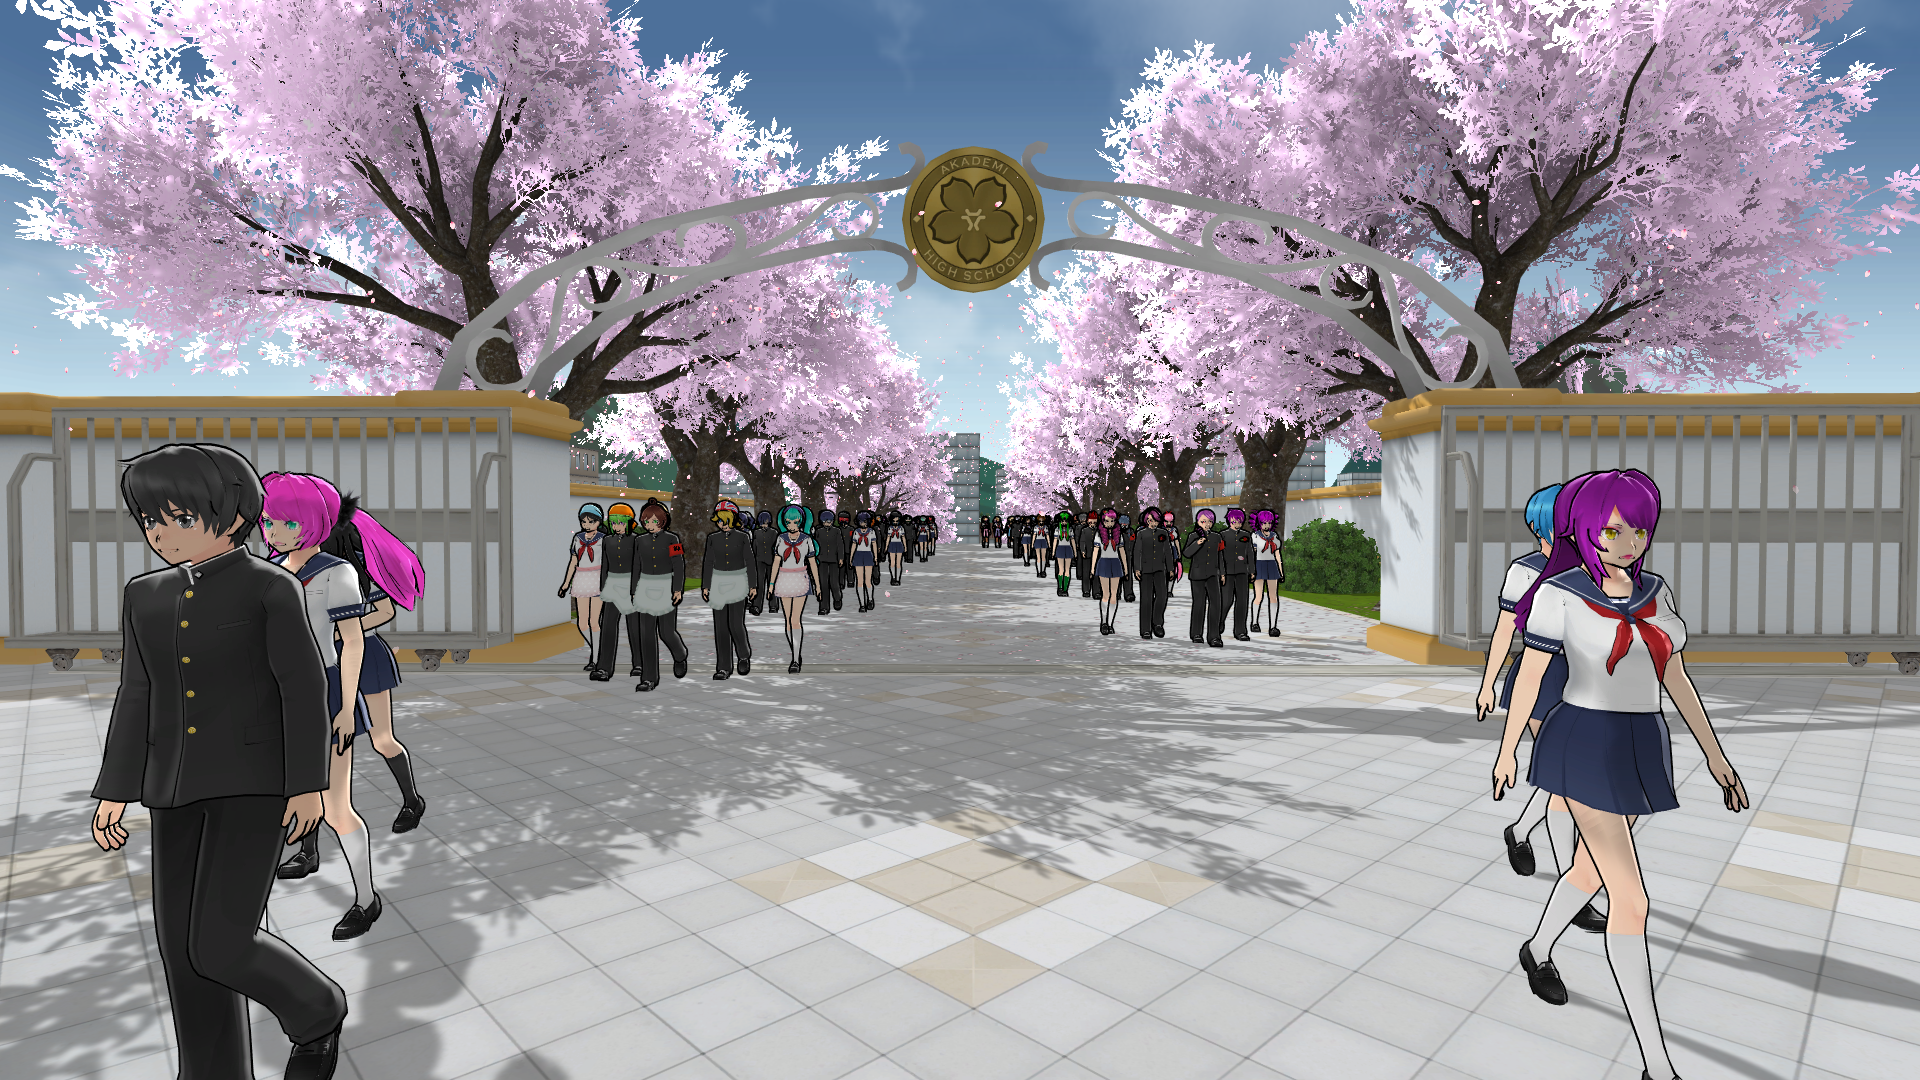 Roblox Yandere Simulator Clothes Robux Offers - oof cherry blossom wallpaper roblox memes roblox oof